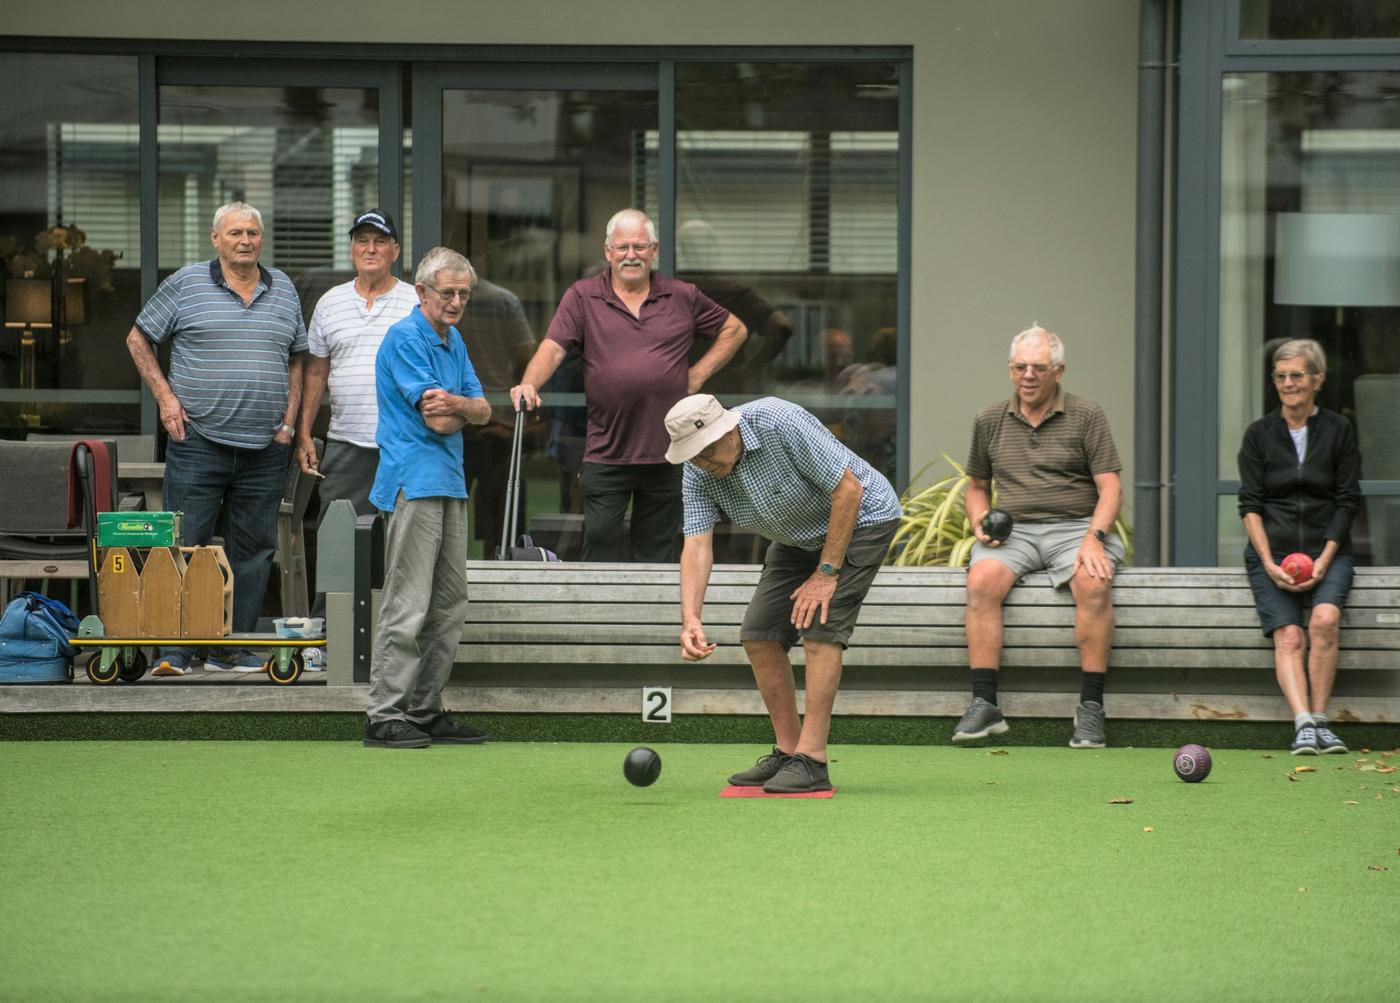 ‘Bowled over’ by bowls at Park Lane